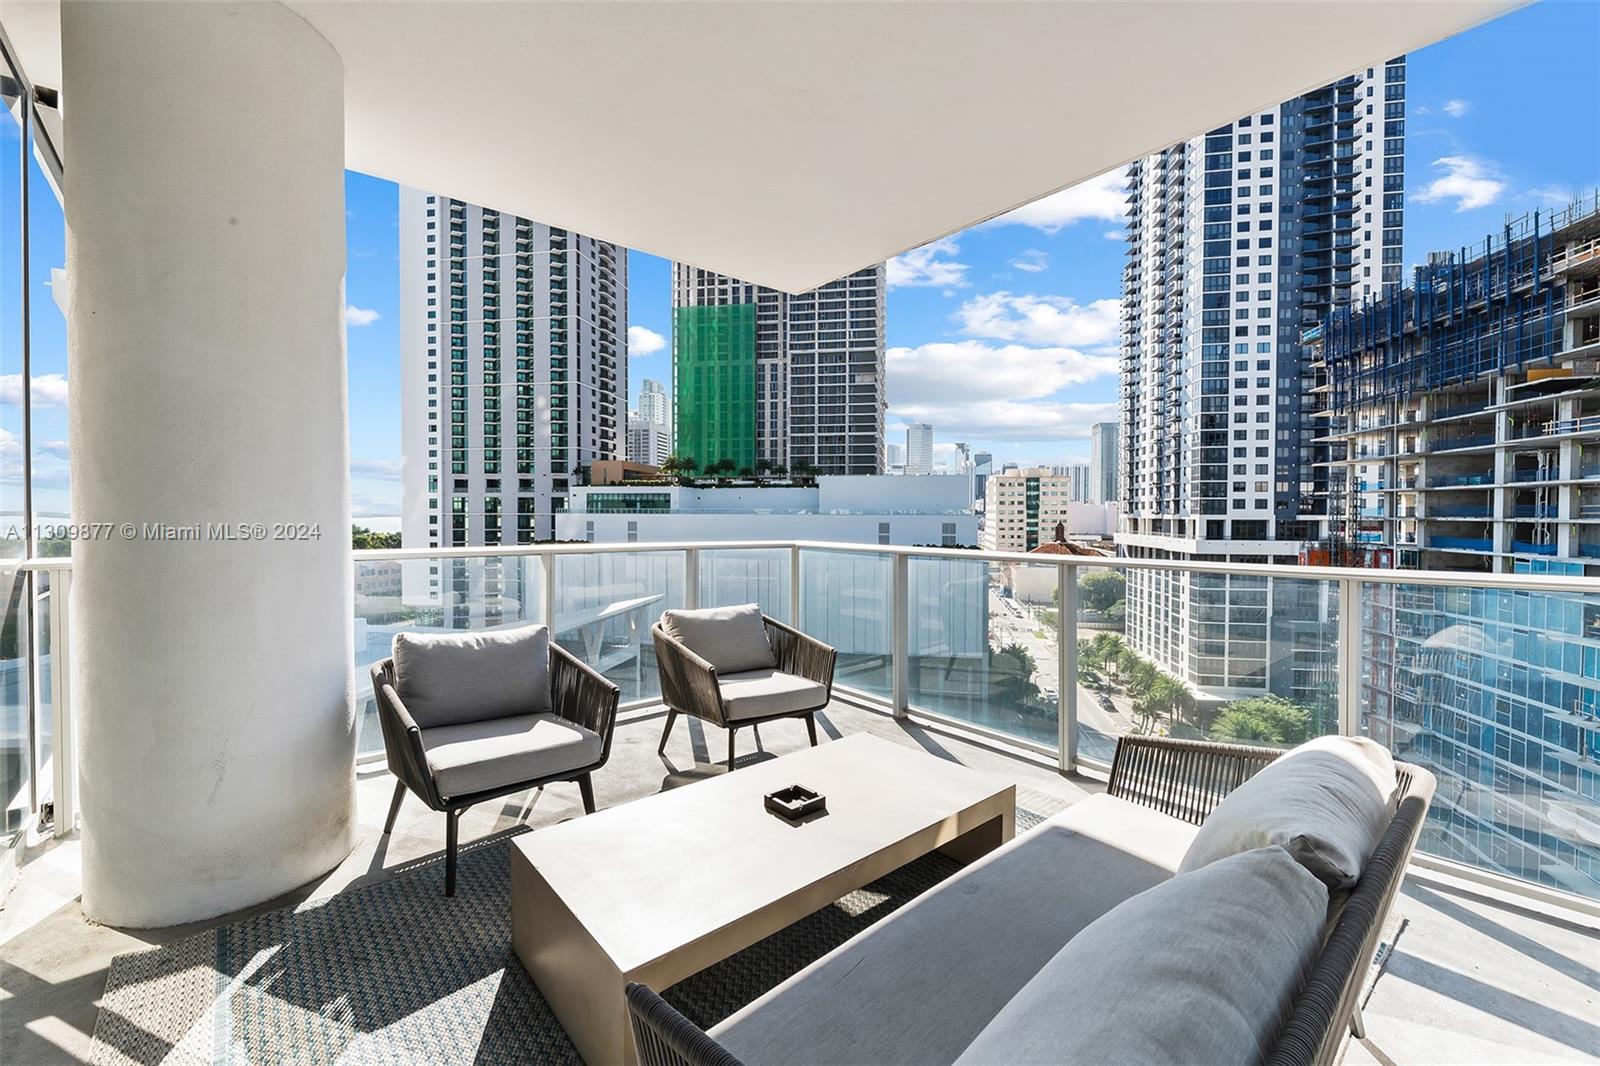 This beautifully furnished 3 beds + den & 4 baths,  2,305 SF is a must see!! Stacking up against the competition, the recently completed PARAMOUNT Miami Worldcenter, every residence at PARAMOUNT features unparalleled views and every imaginable luxury within also known as the most amenitized building in the country, with access to 46 different amenities such as 5 pools, spa, outdoor lounge, summer kitchen, game room, state of the art fitness center, boxing studio, basketball court, racquetball, yoga, observatory, jam room and recording studio and much more! Located within Miami Worldcenter, the second largest master planned community in the U.S. Just steps from the Brightline Train Station, Port of MIA, AA Arena and minutes to MIA Airport, Wynwood, Miami Beach.